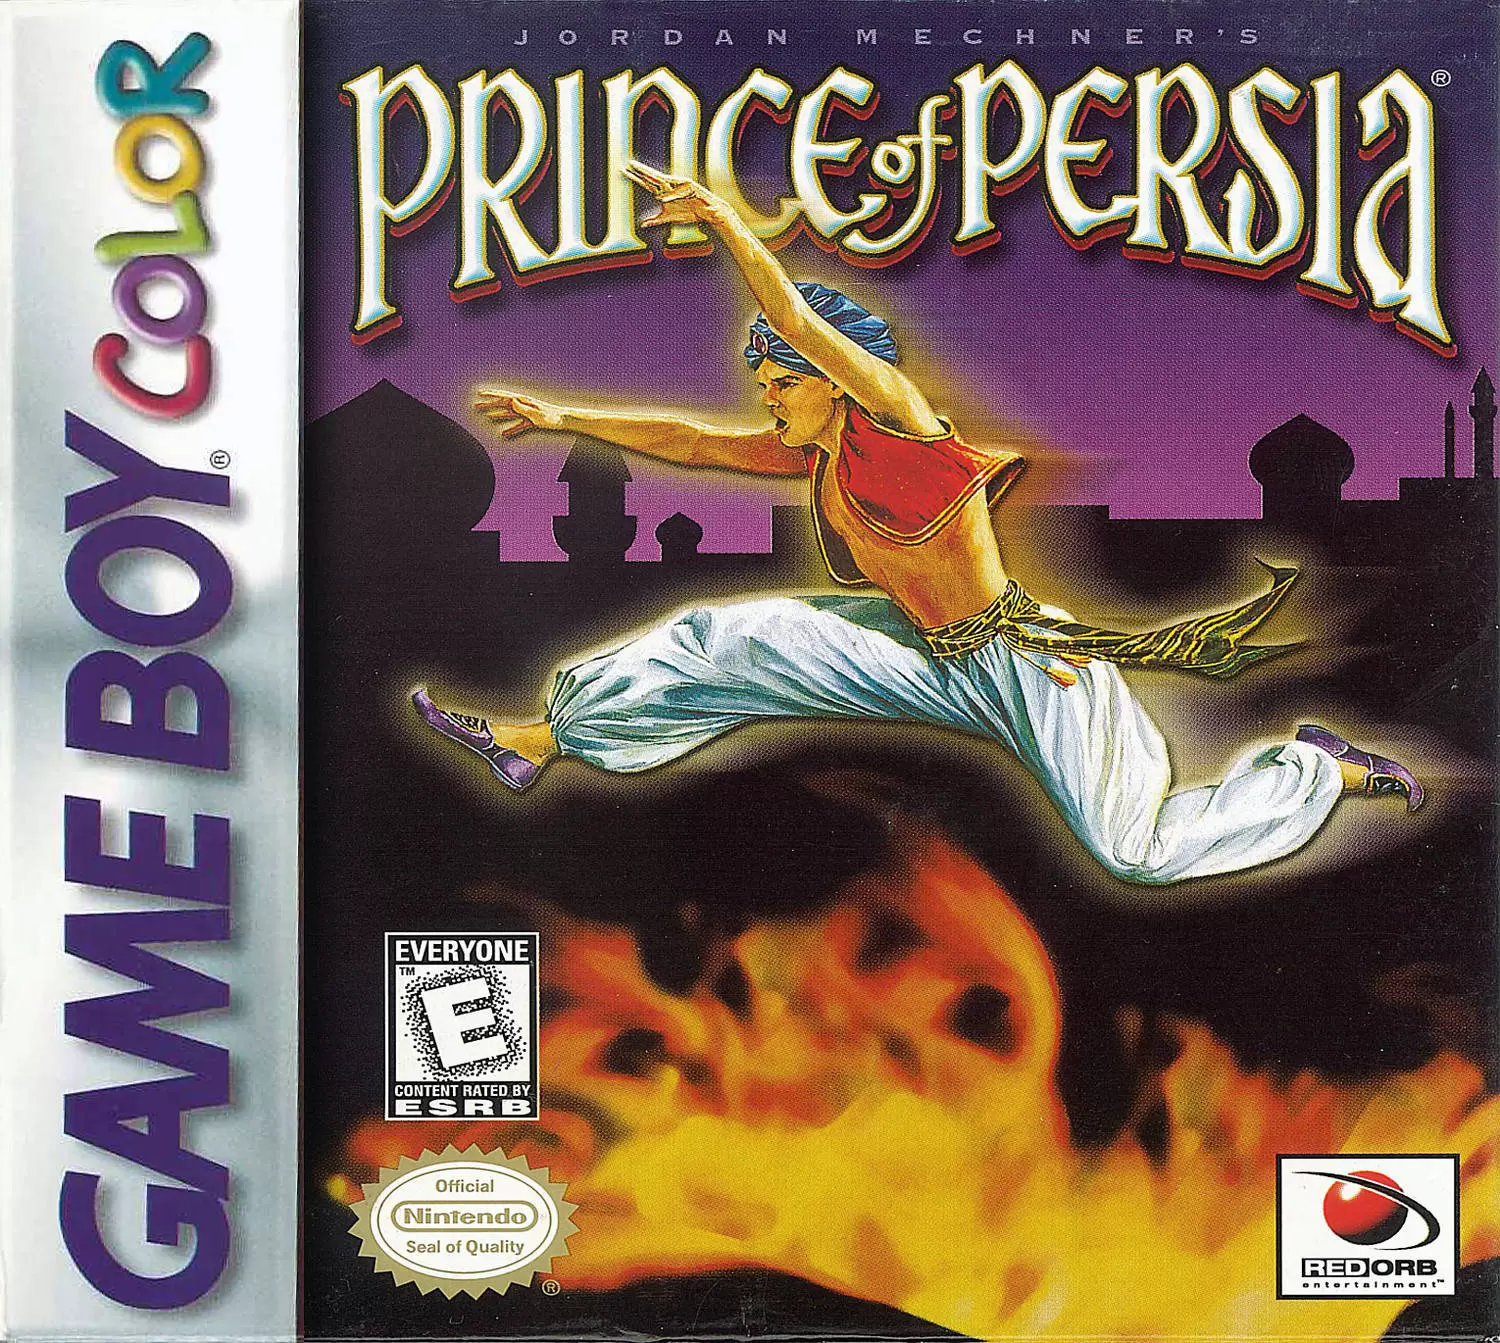 Game Boy Color Games - Prince of Persia